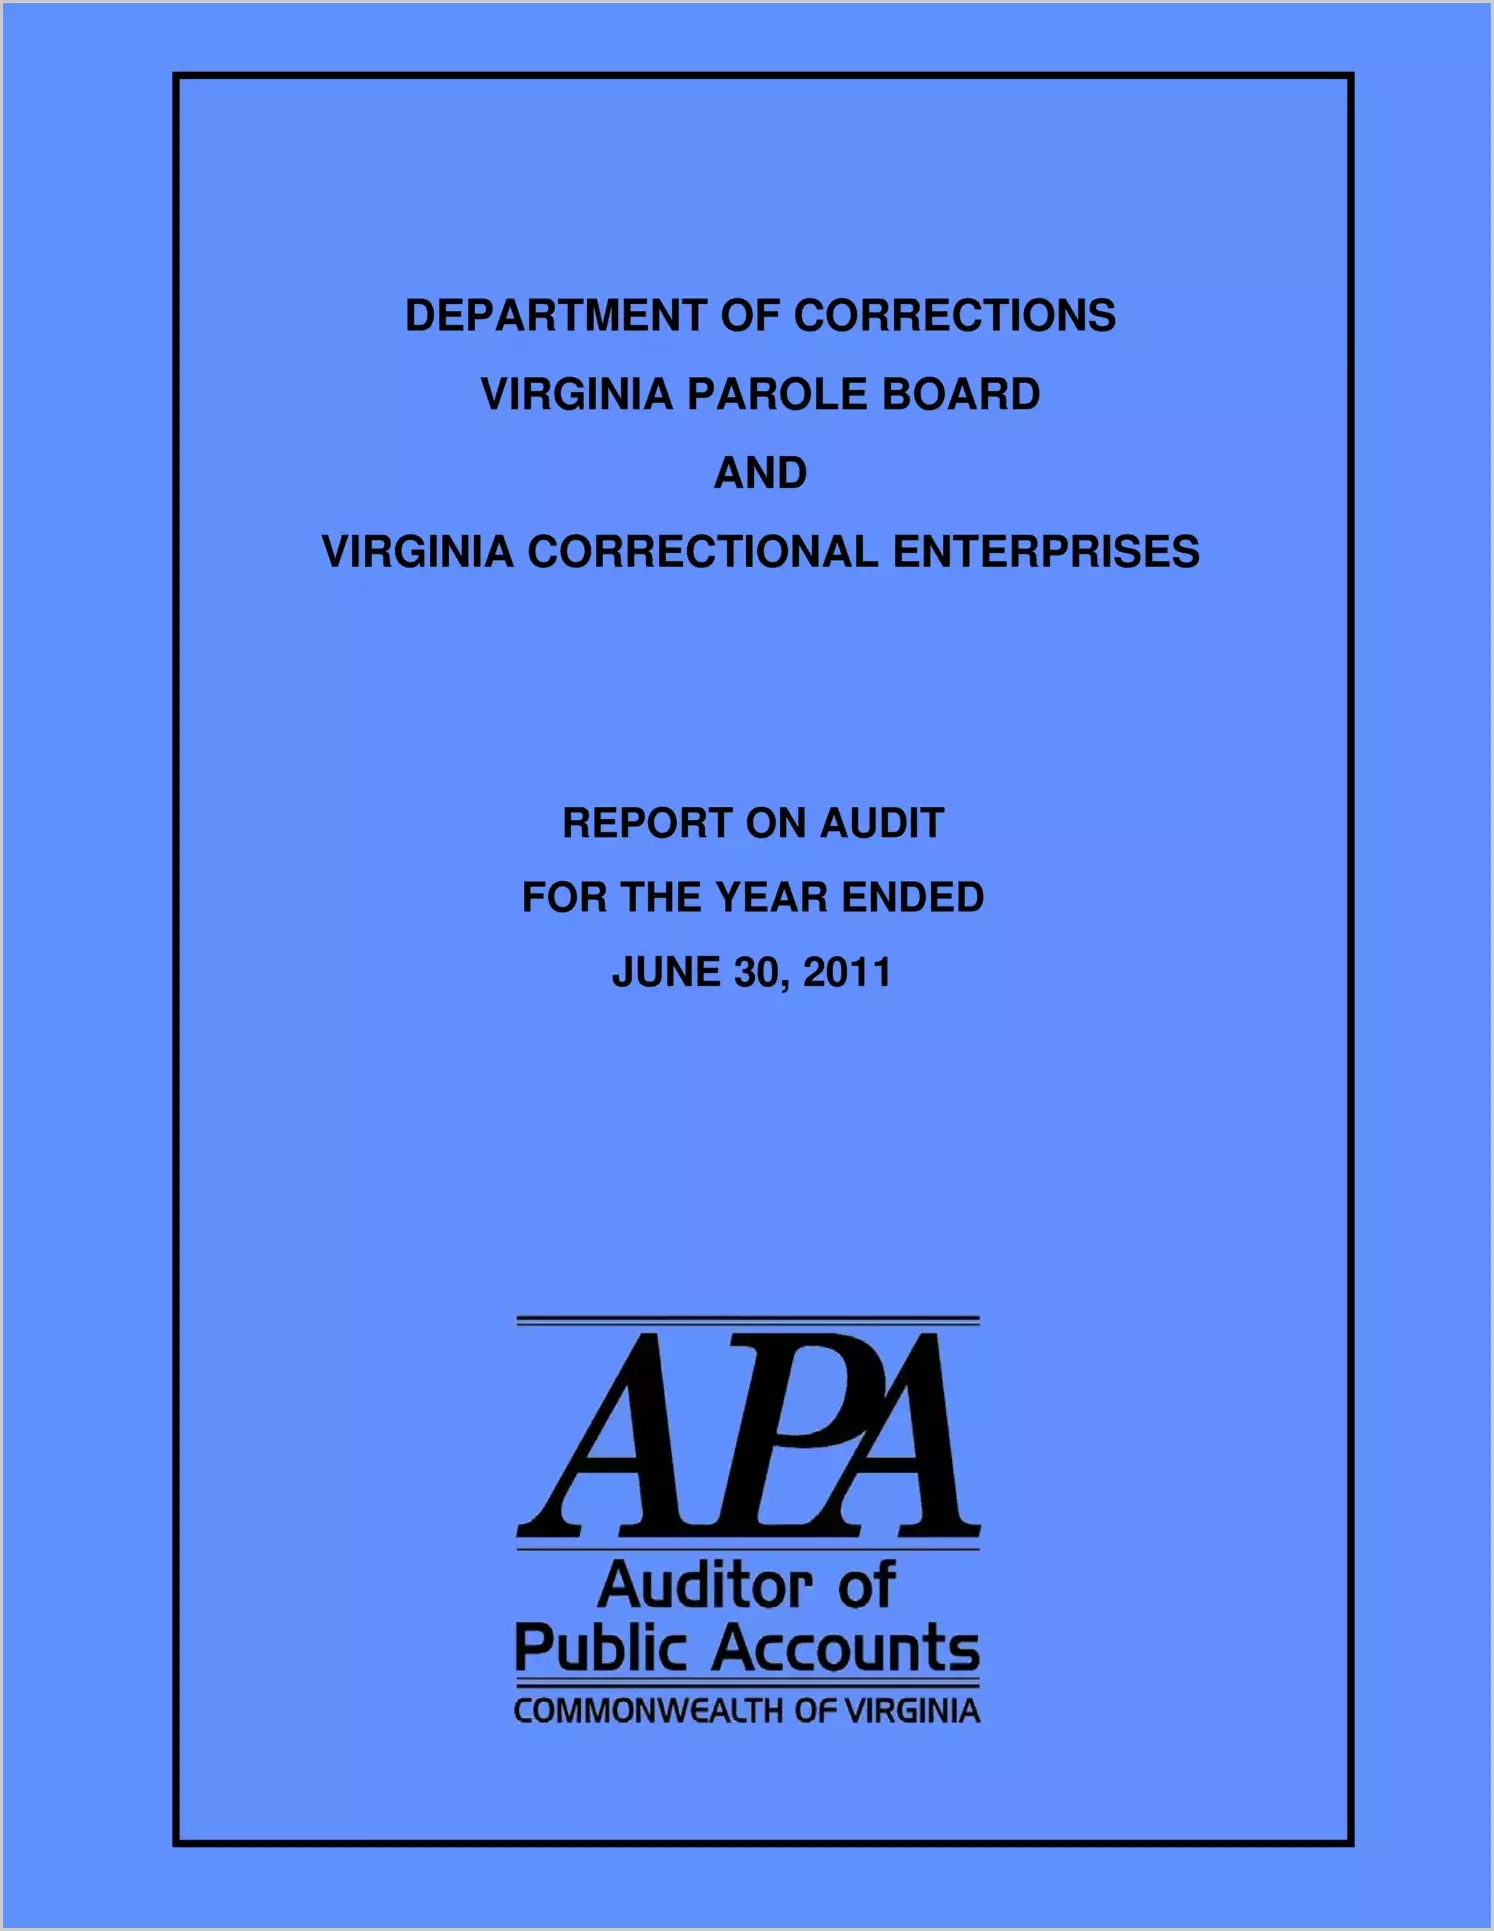 Department of Corrections, Virginia Parole Board and Virginia Correctional Enterprises report on audit for the year ended June 30, 2011